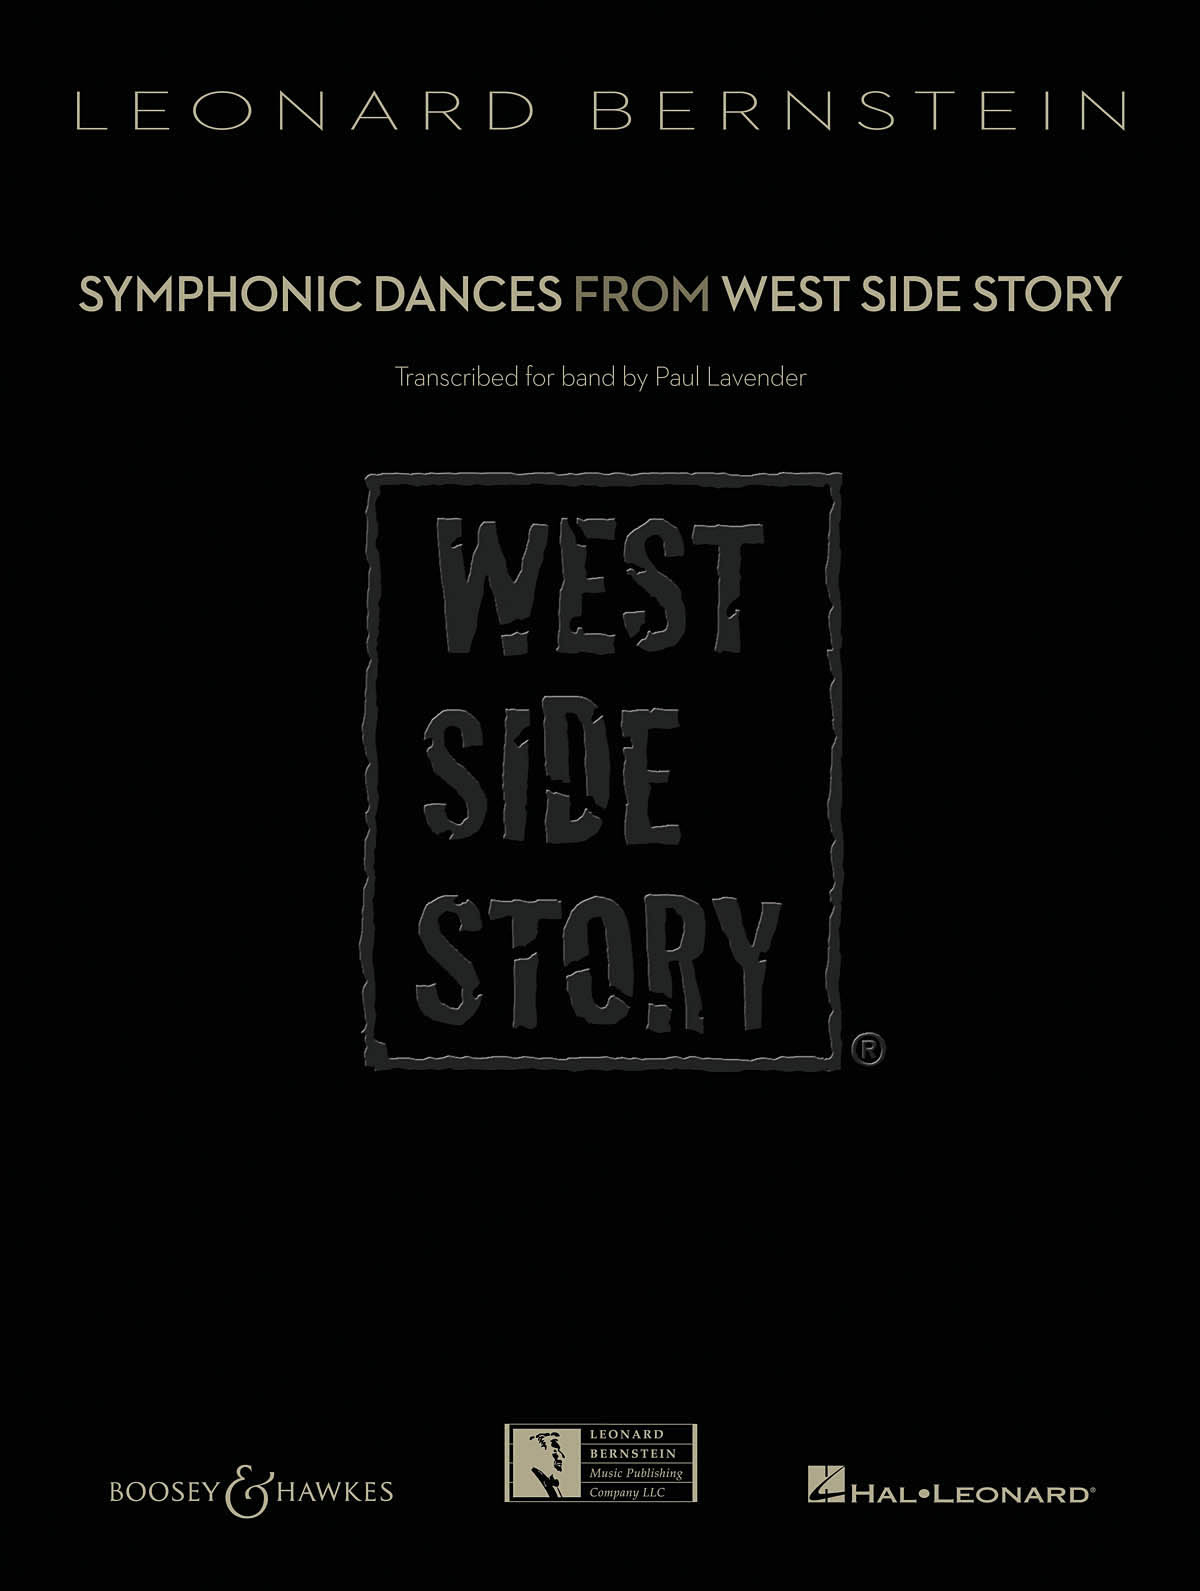 Symphonic Dances from West Side Story